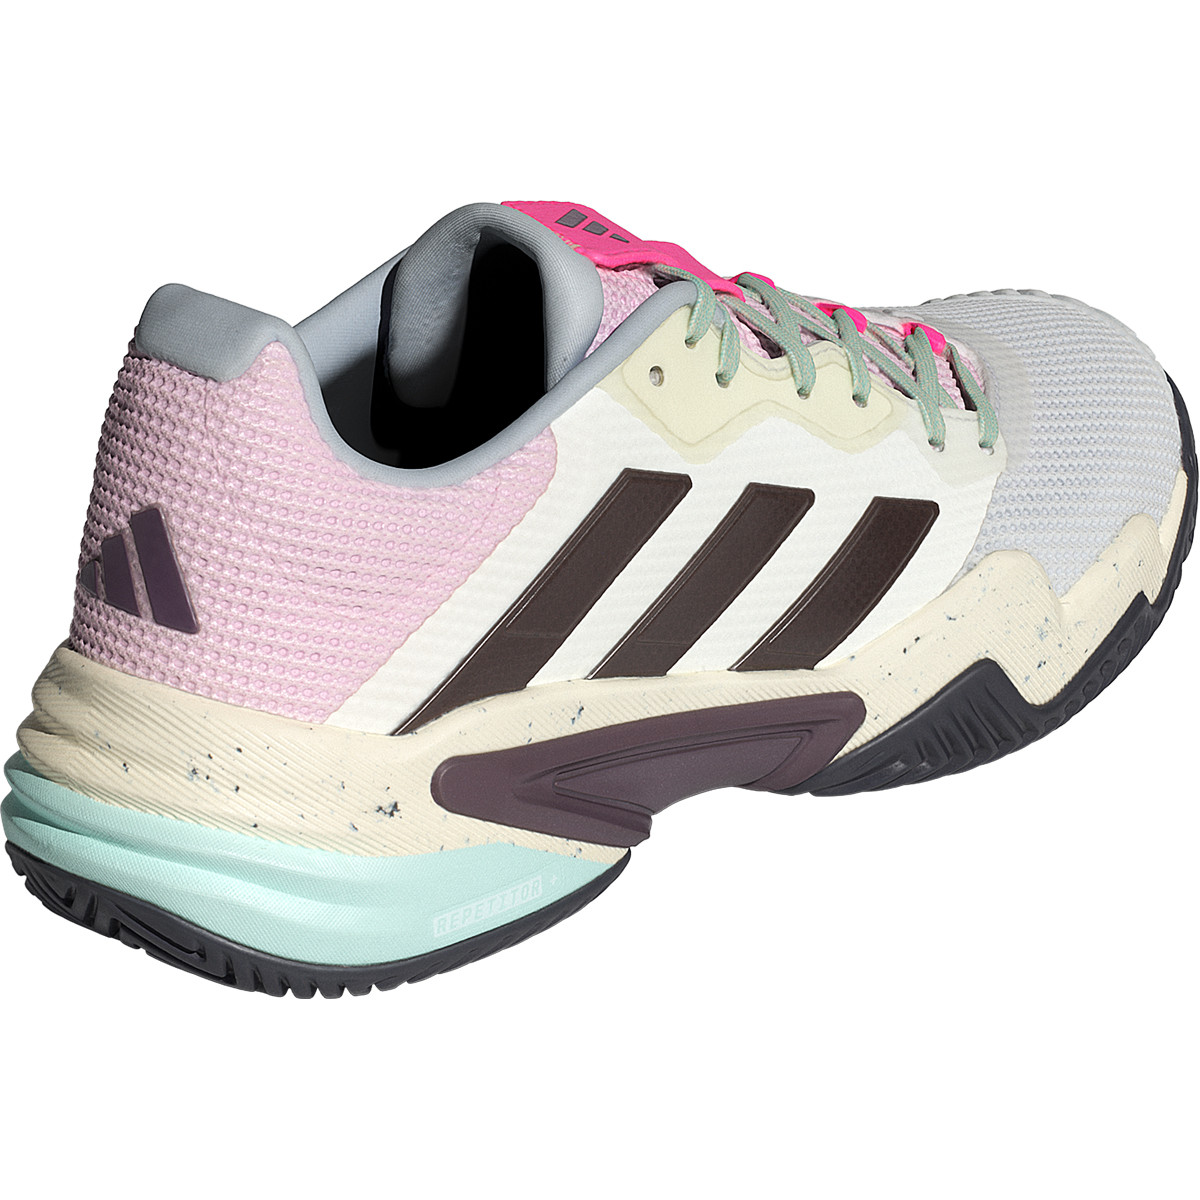 ADIDAS BARRICADE 13 MIAMI /INDIAN WELLS ALL COURT SHOES - ADIDAS 